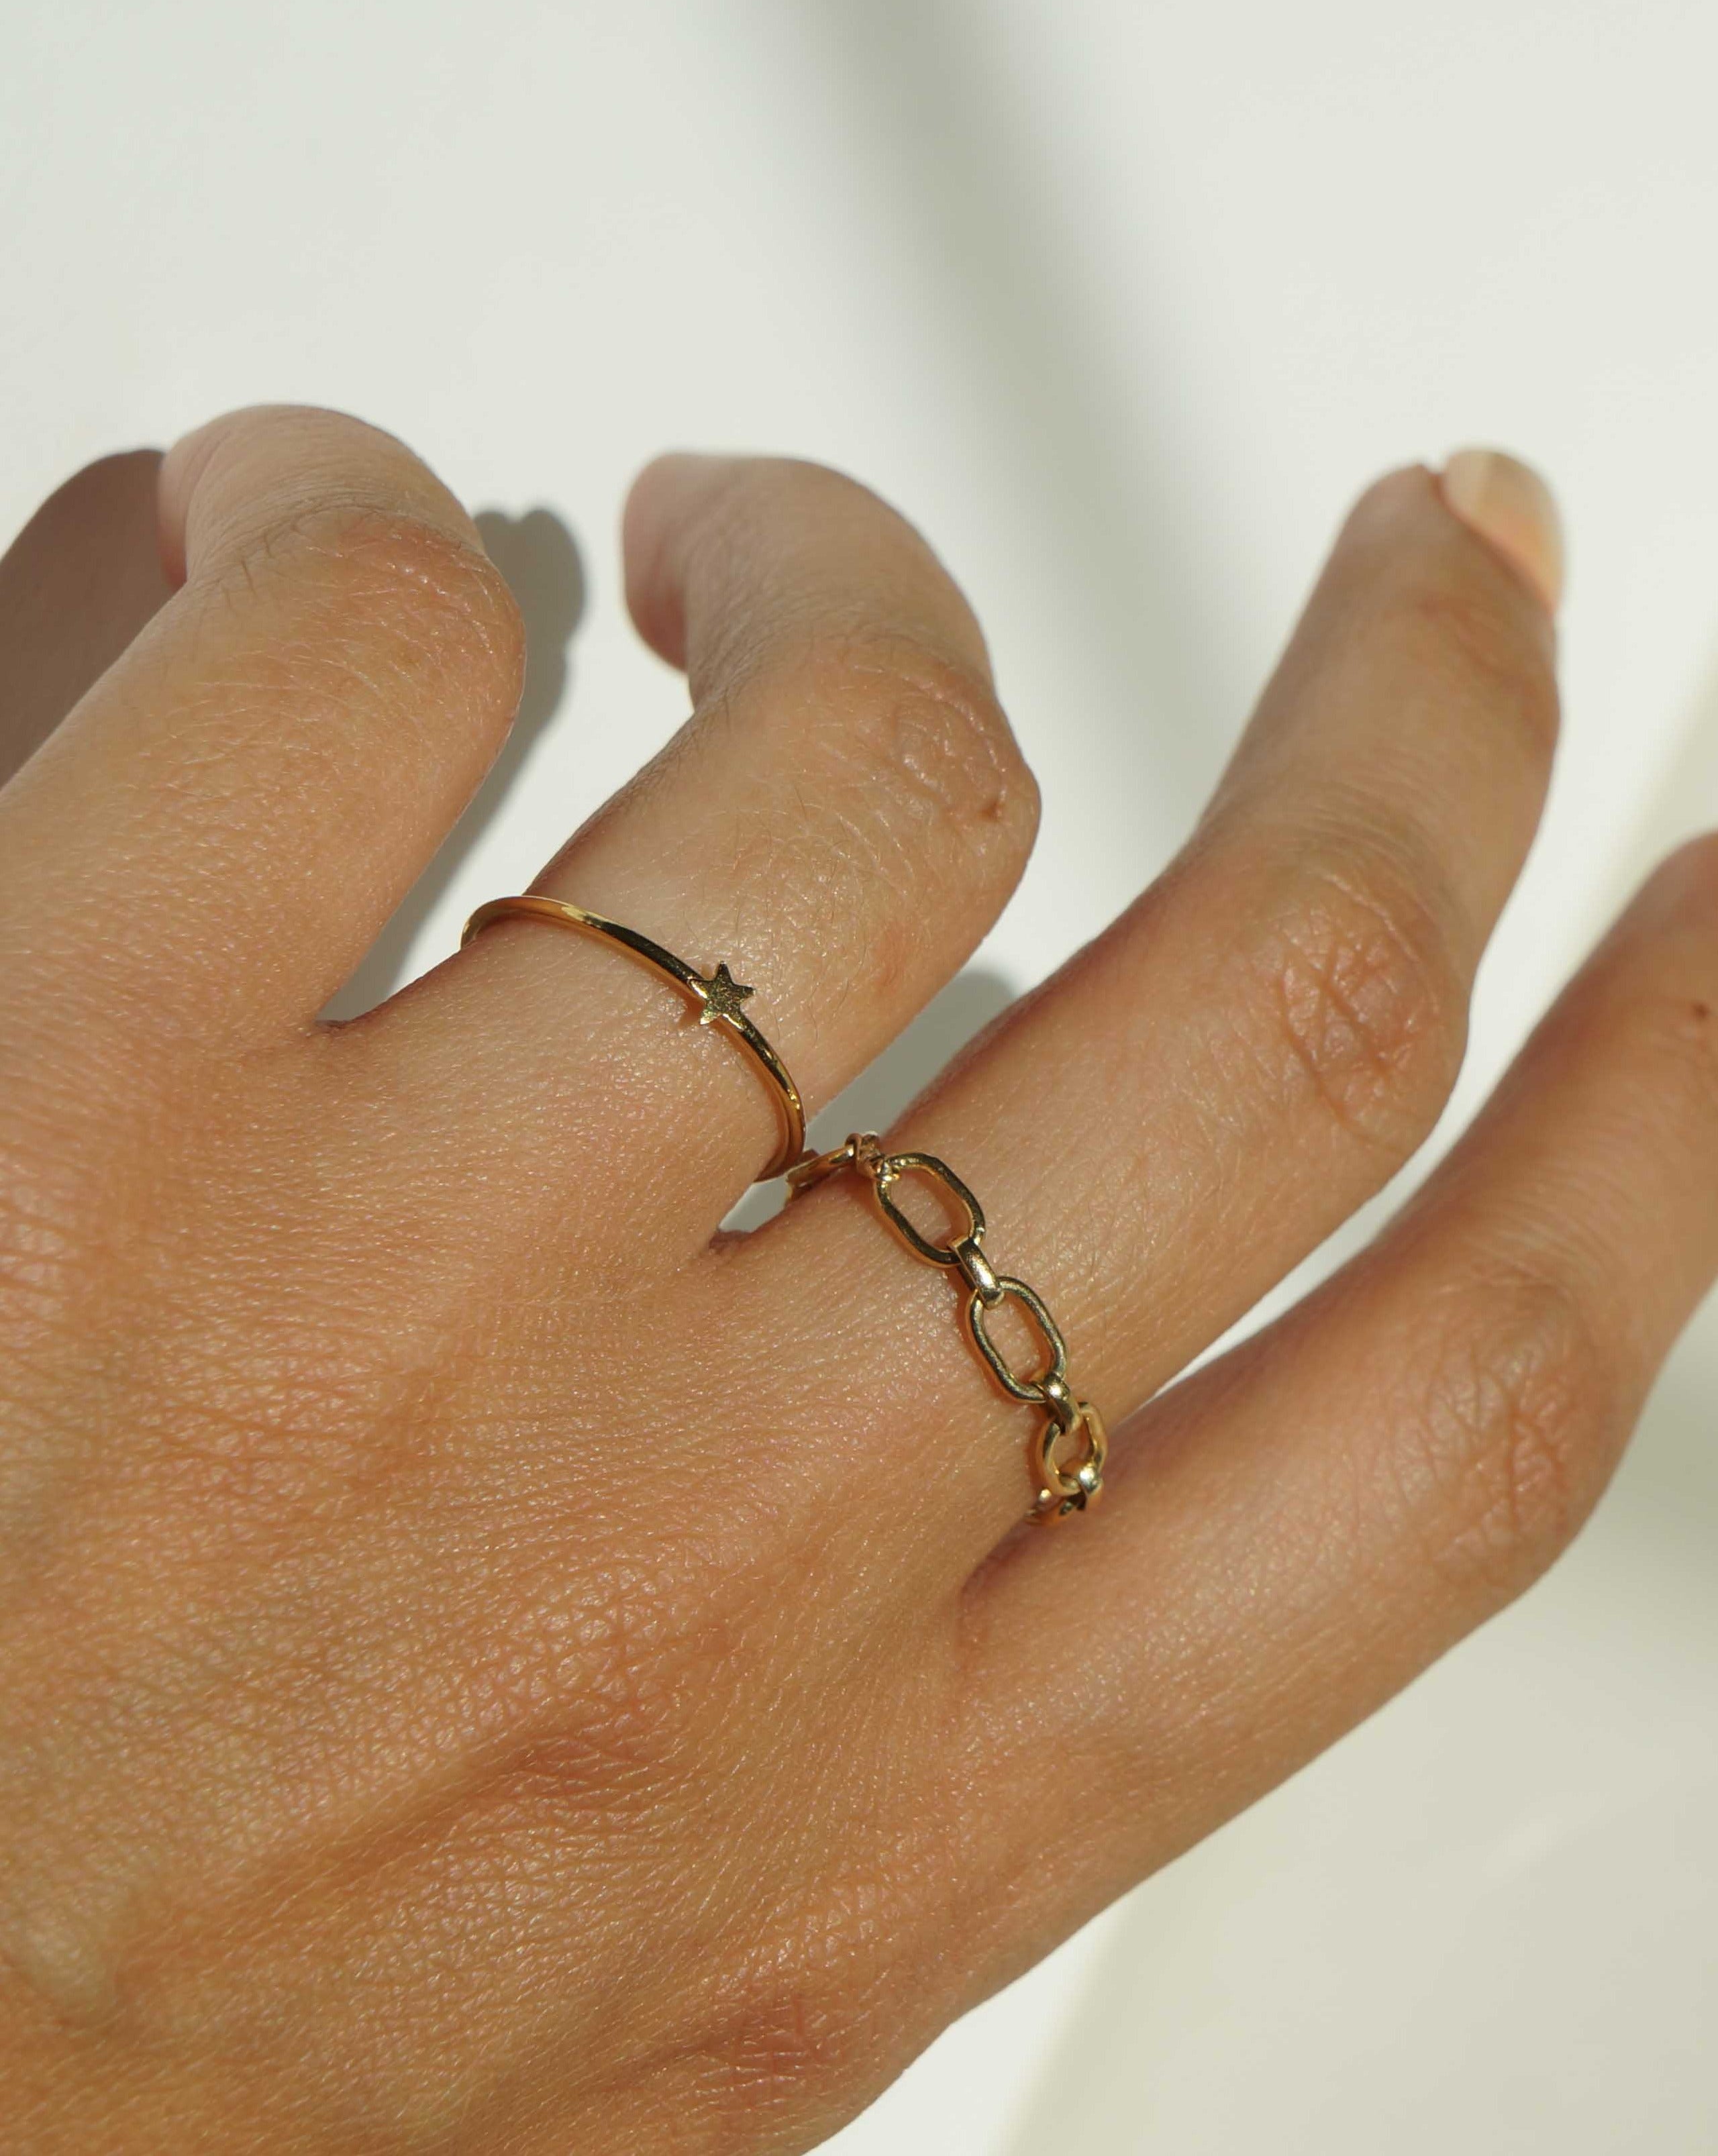 Star Ring by KOZAKH. A 1mm band, crafted in 14K Gold Filled, featuring a star shape design.